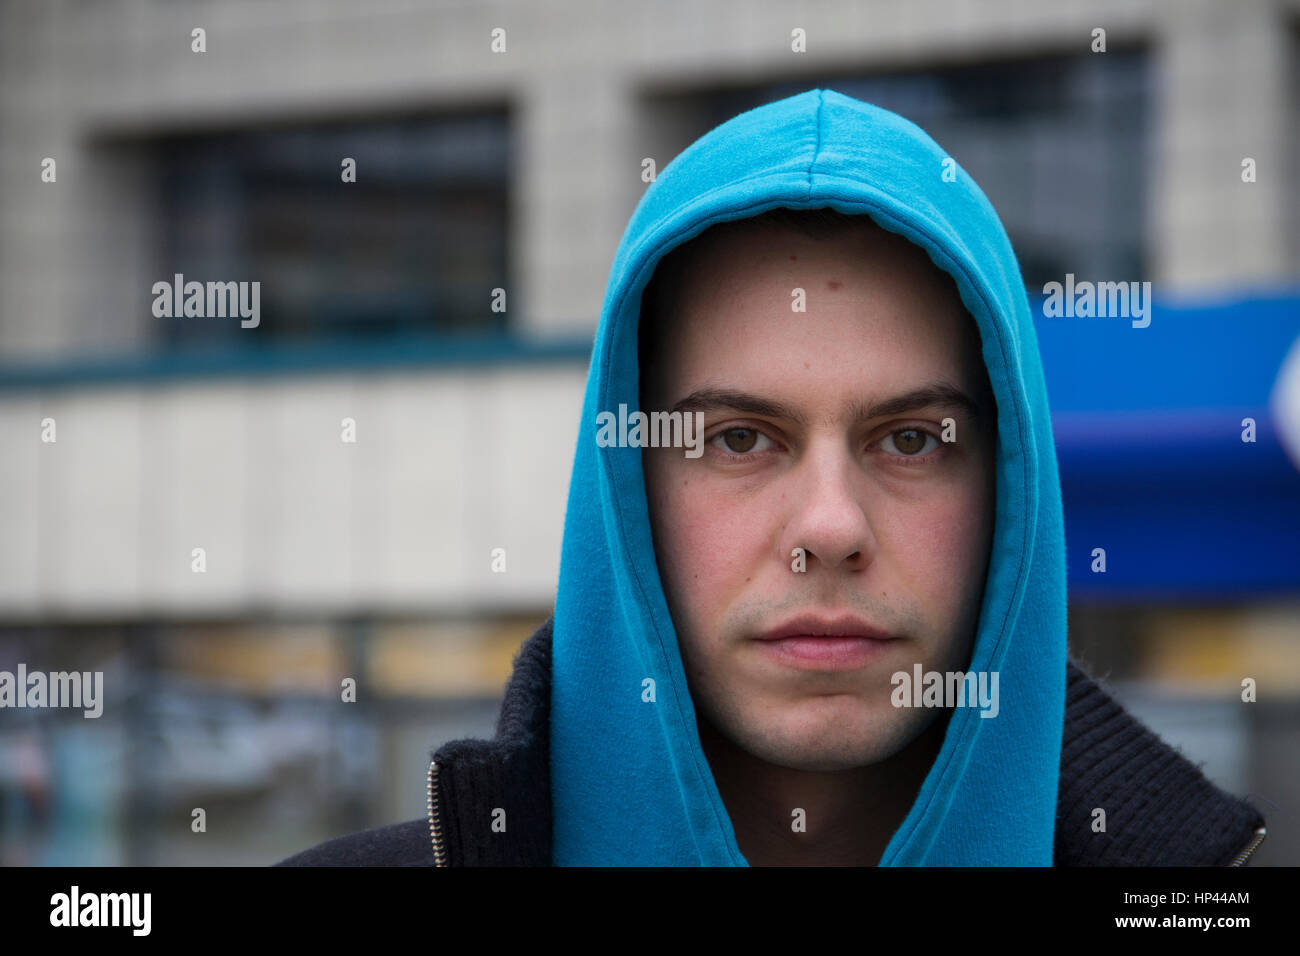 young man with a blue hood Stock Photo